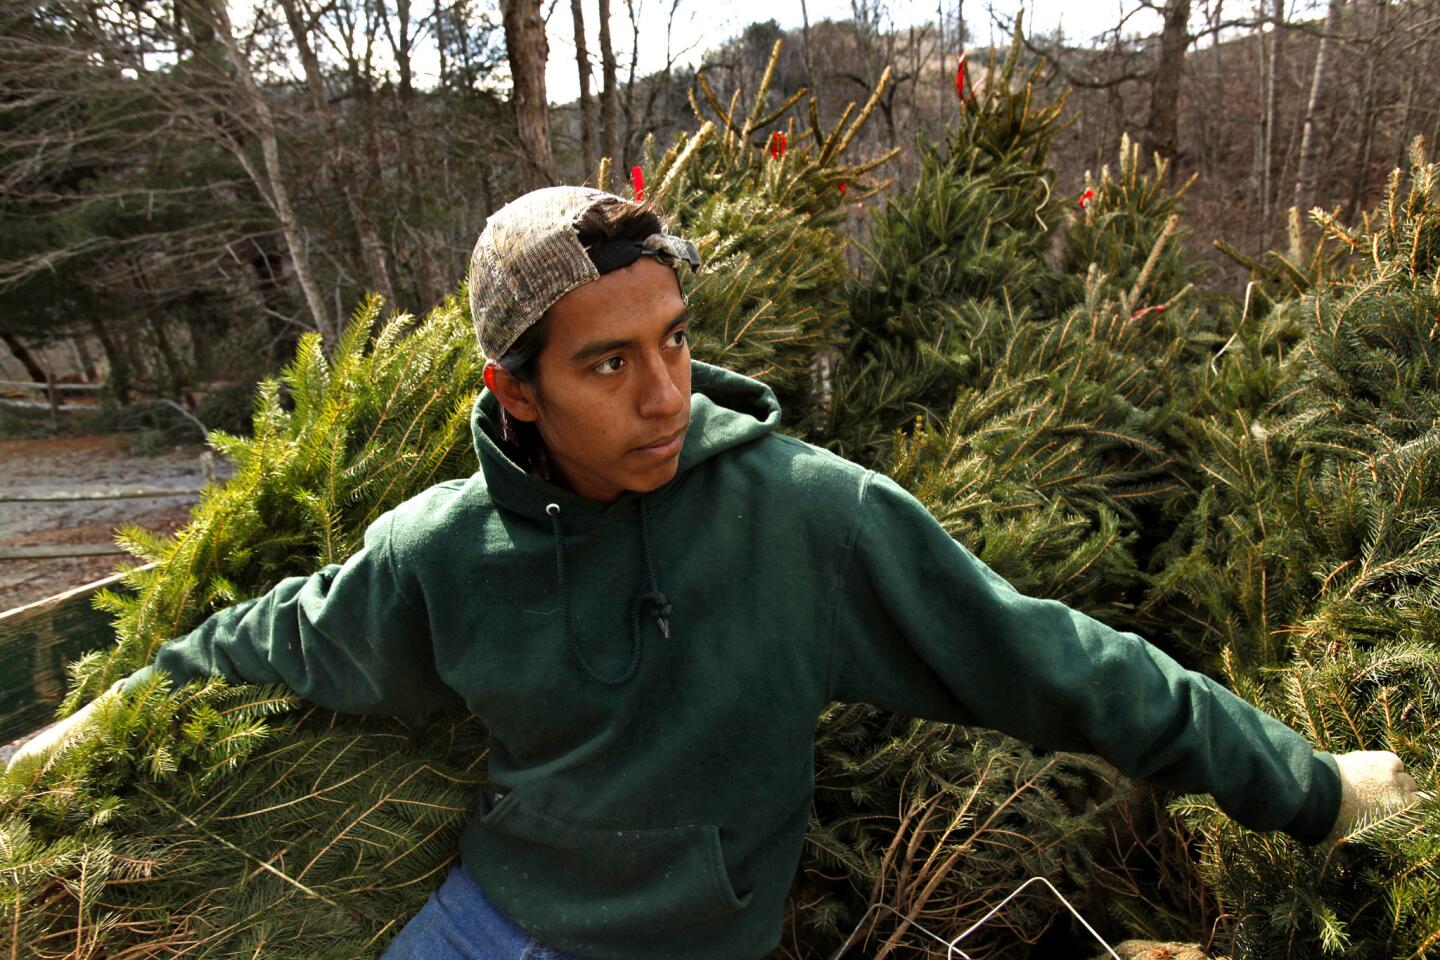 Jose Gill, 23, from Tamaulipas state in Mexico, is starting his second year as a guest worker at Barr Evergreens in Crumpler, N.C. His employer, Rusty Barr, pays for transportation from Mexico, housing and insurance, among other things, and must pay such workers about a third more than the state minimum wage. It's still poor by U.S. standards, but the workers say it's better than what they can find back home.